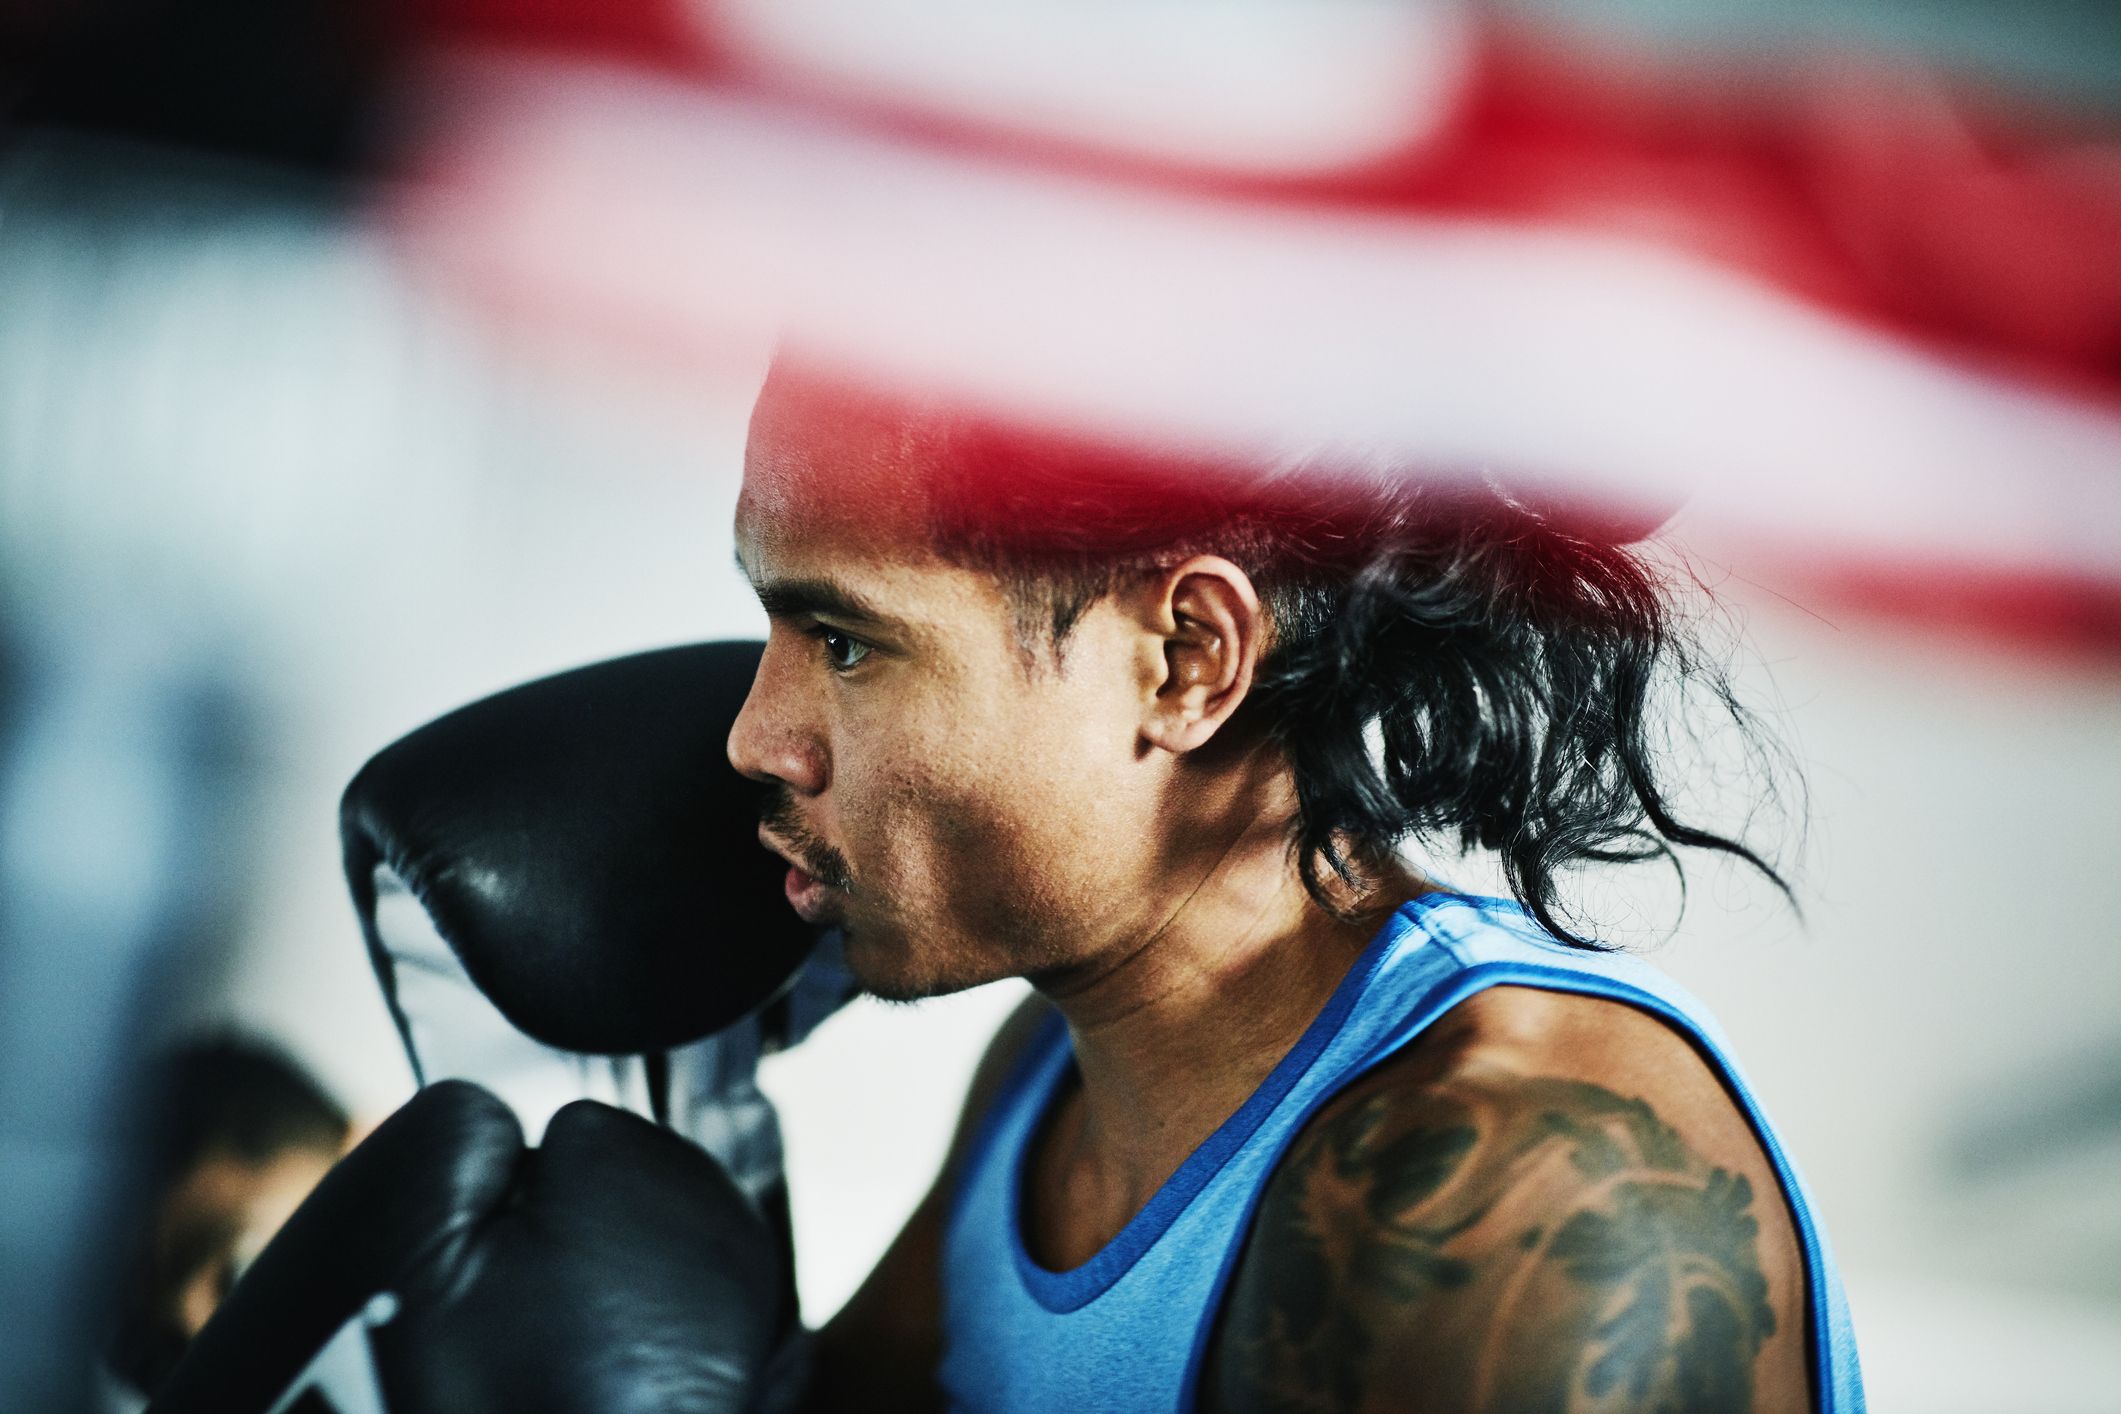 An Olympic Boxer Shared His Top 10 Sparring Tips for Beginners